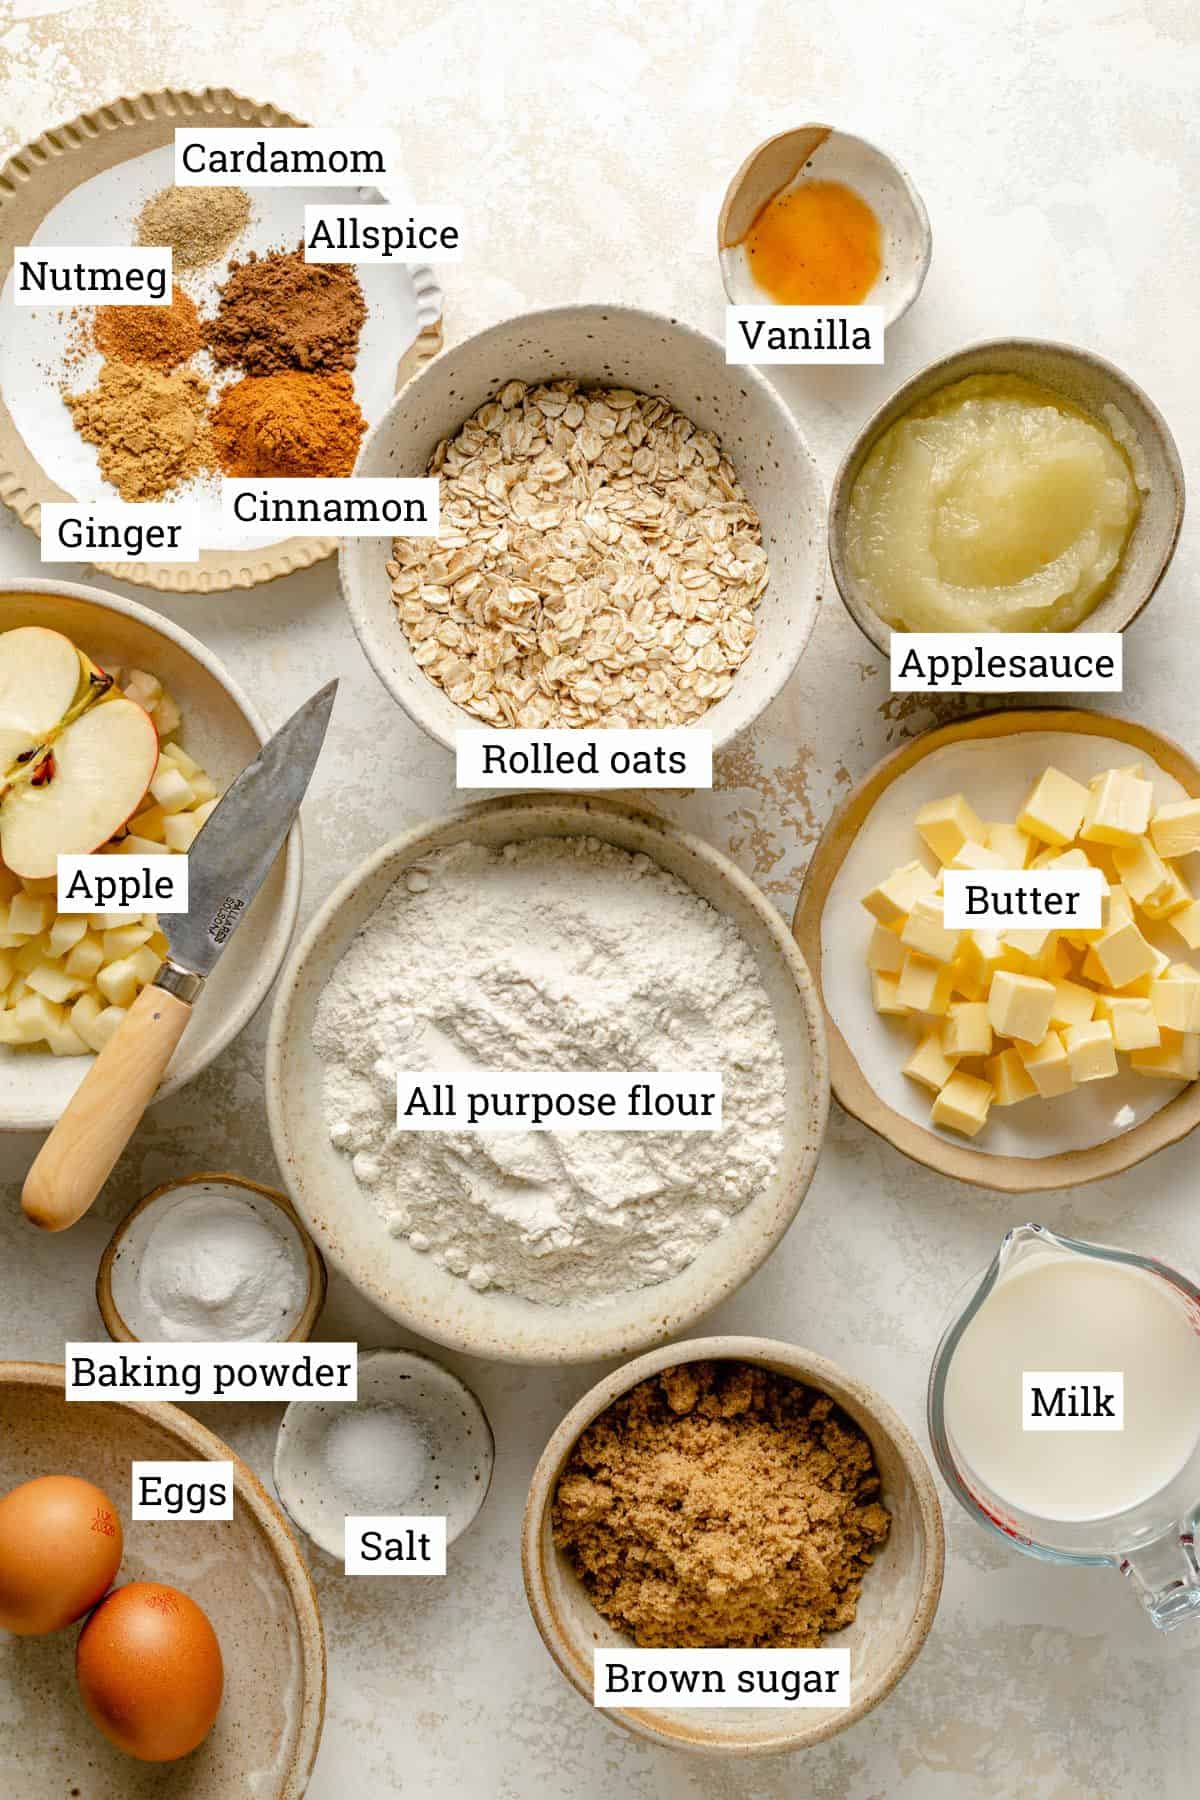 Ingredients for apple oatmeal muffins in various bowls on a work surface.